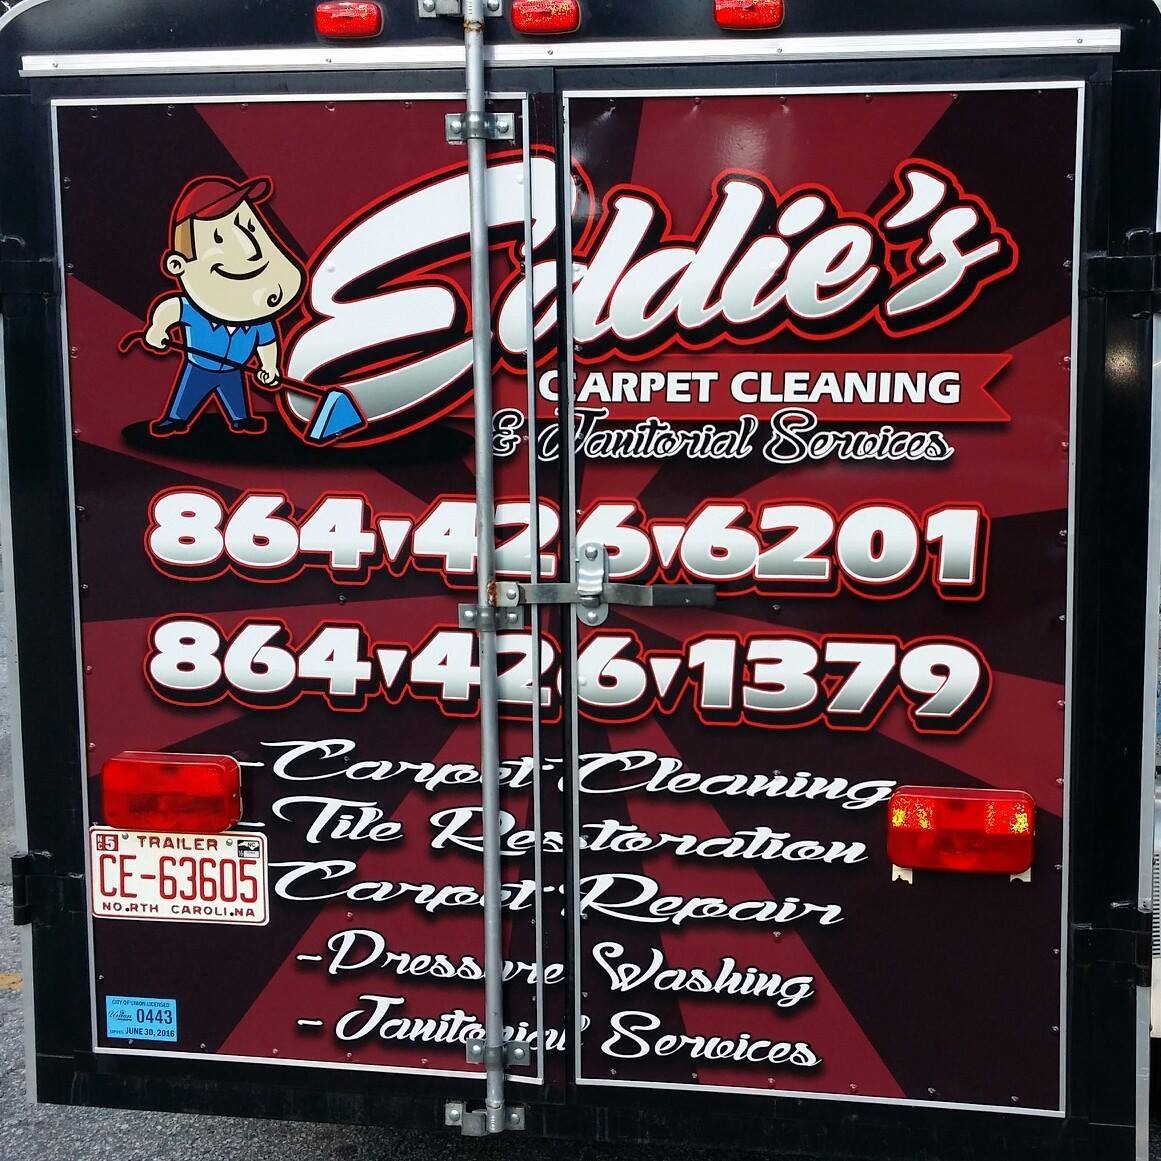 Eddie's Carpet Cleaning & Janitorial Service